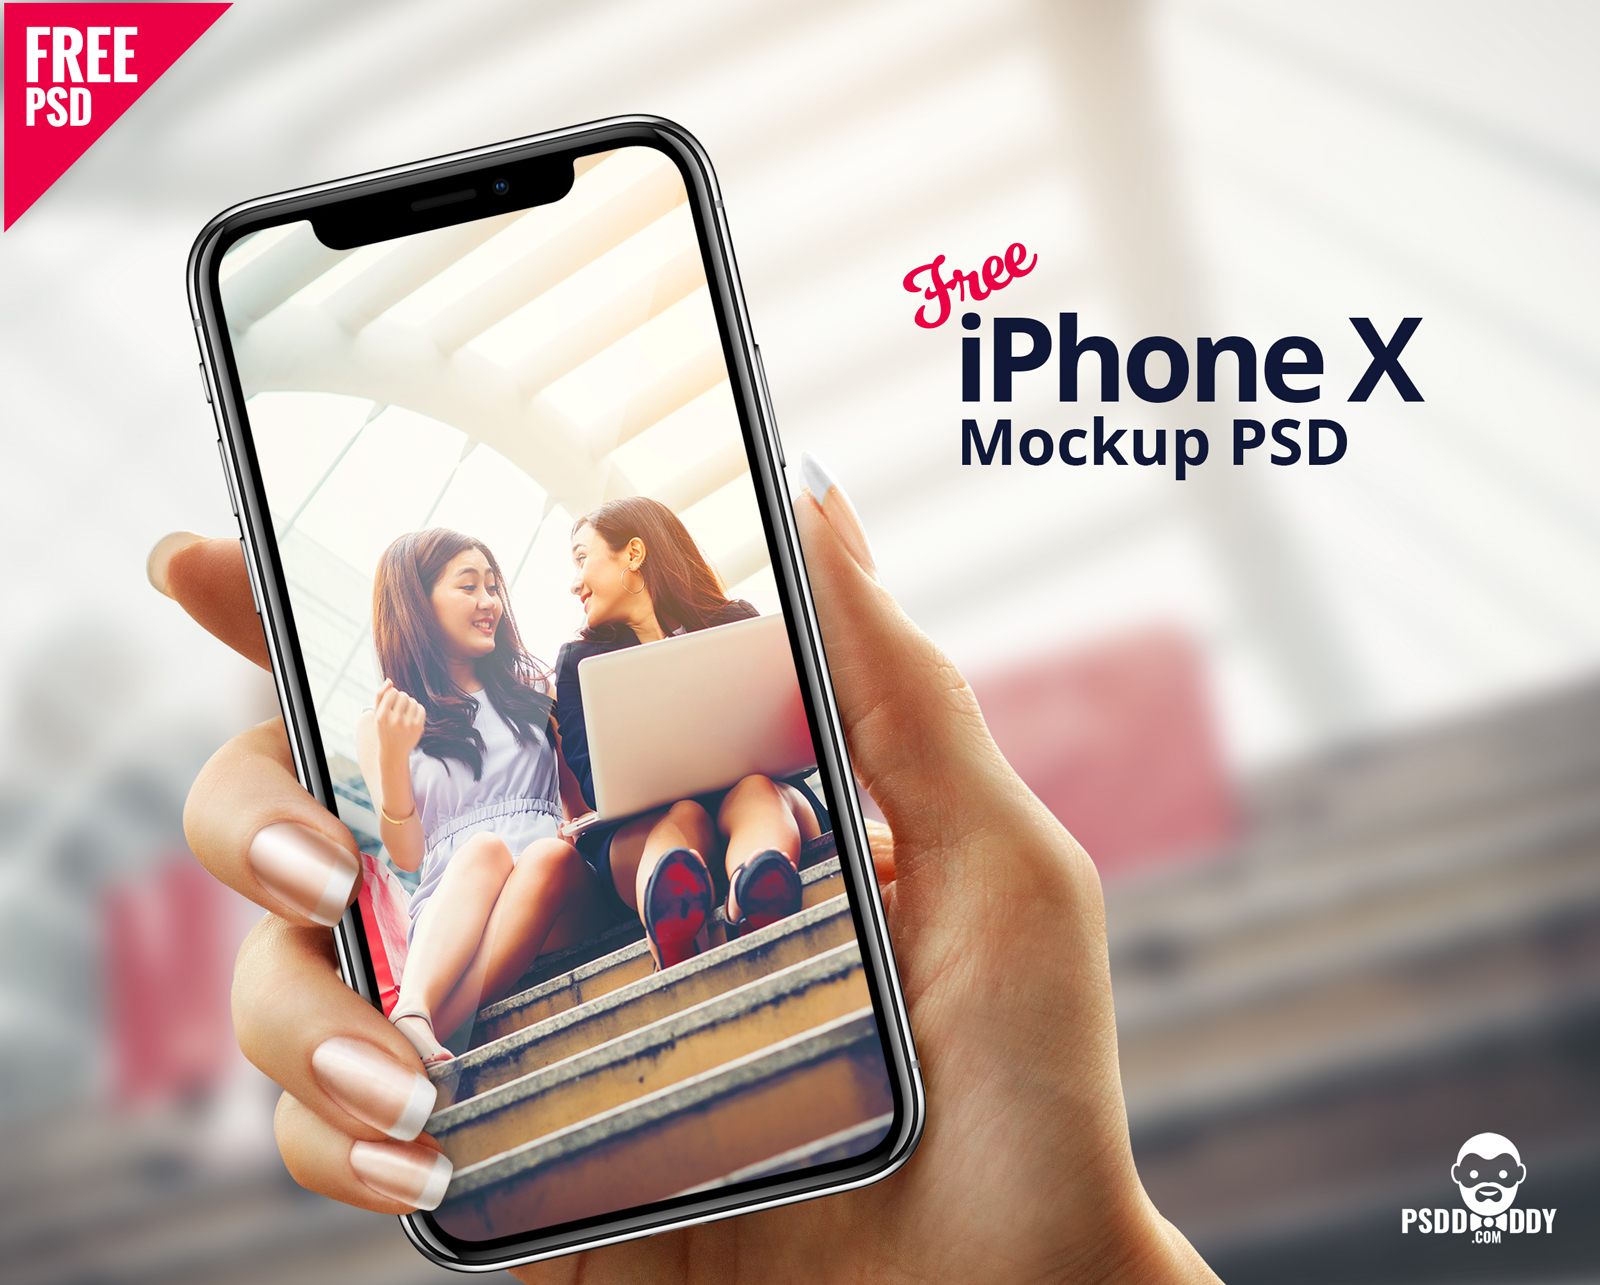 Download 25+ Stylish iPhone X PSD Mockups Free to showcase your design! | Free PSD Templates